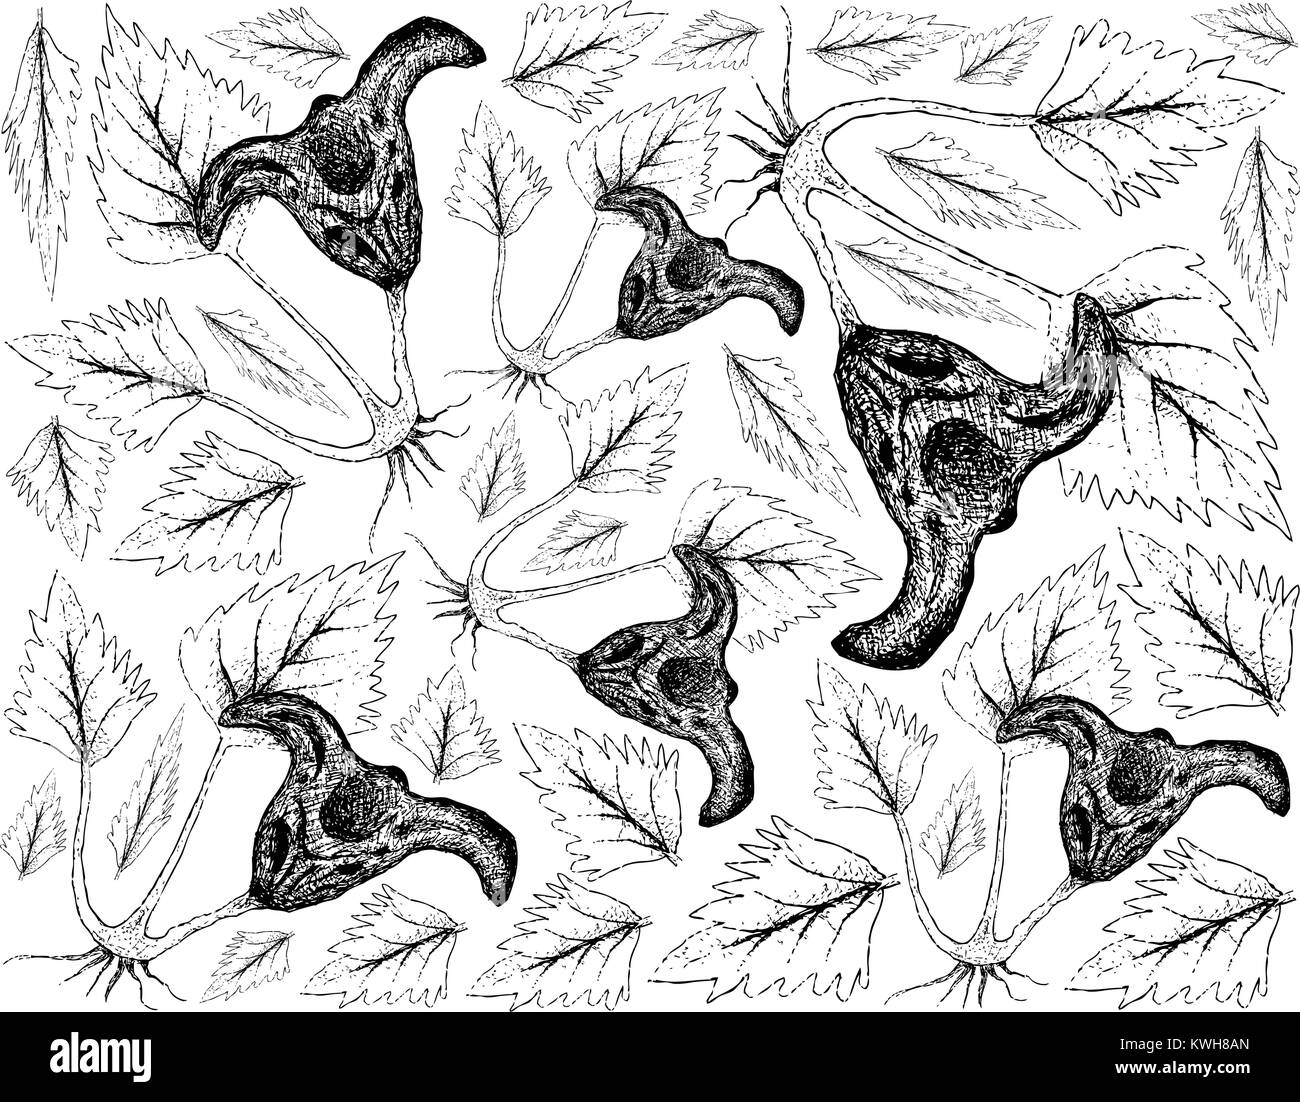 Root and Tuberous Vegetables, Illustration Hand Drawn Sketch of Water Caltrop or Trapa Natans Plant on White Background. Good Source of Dietary Fiber, Stock Vector